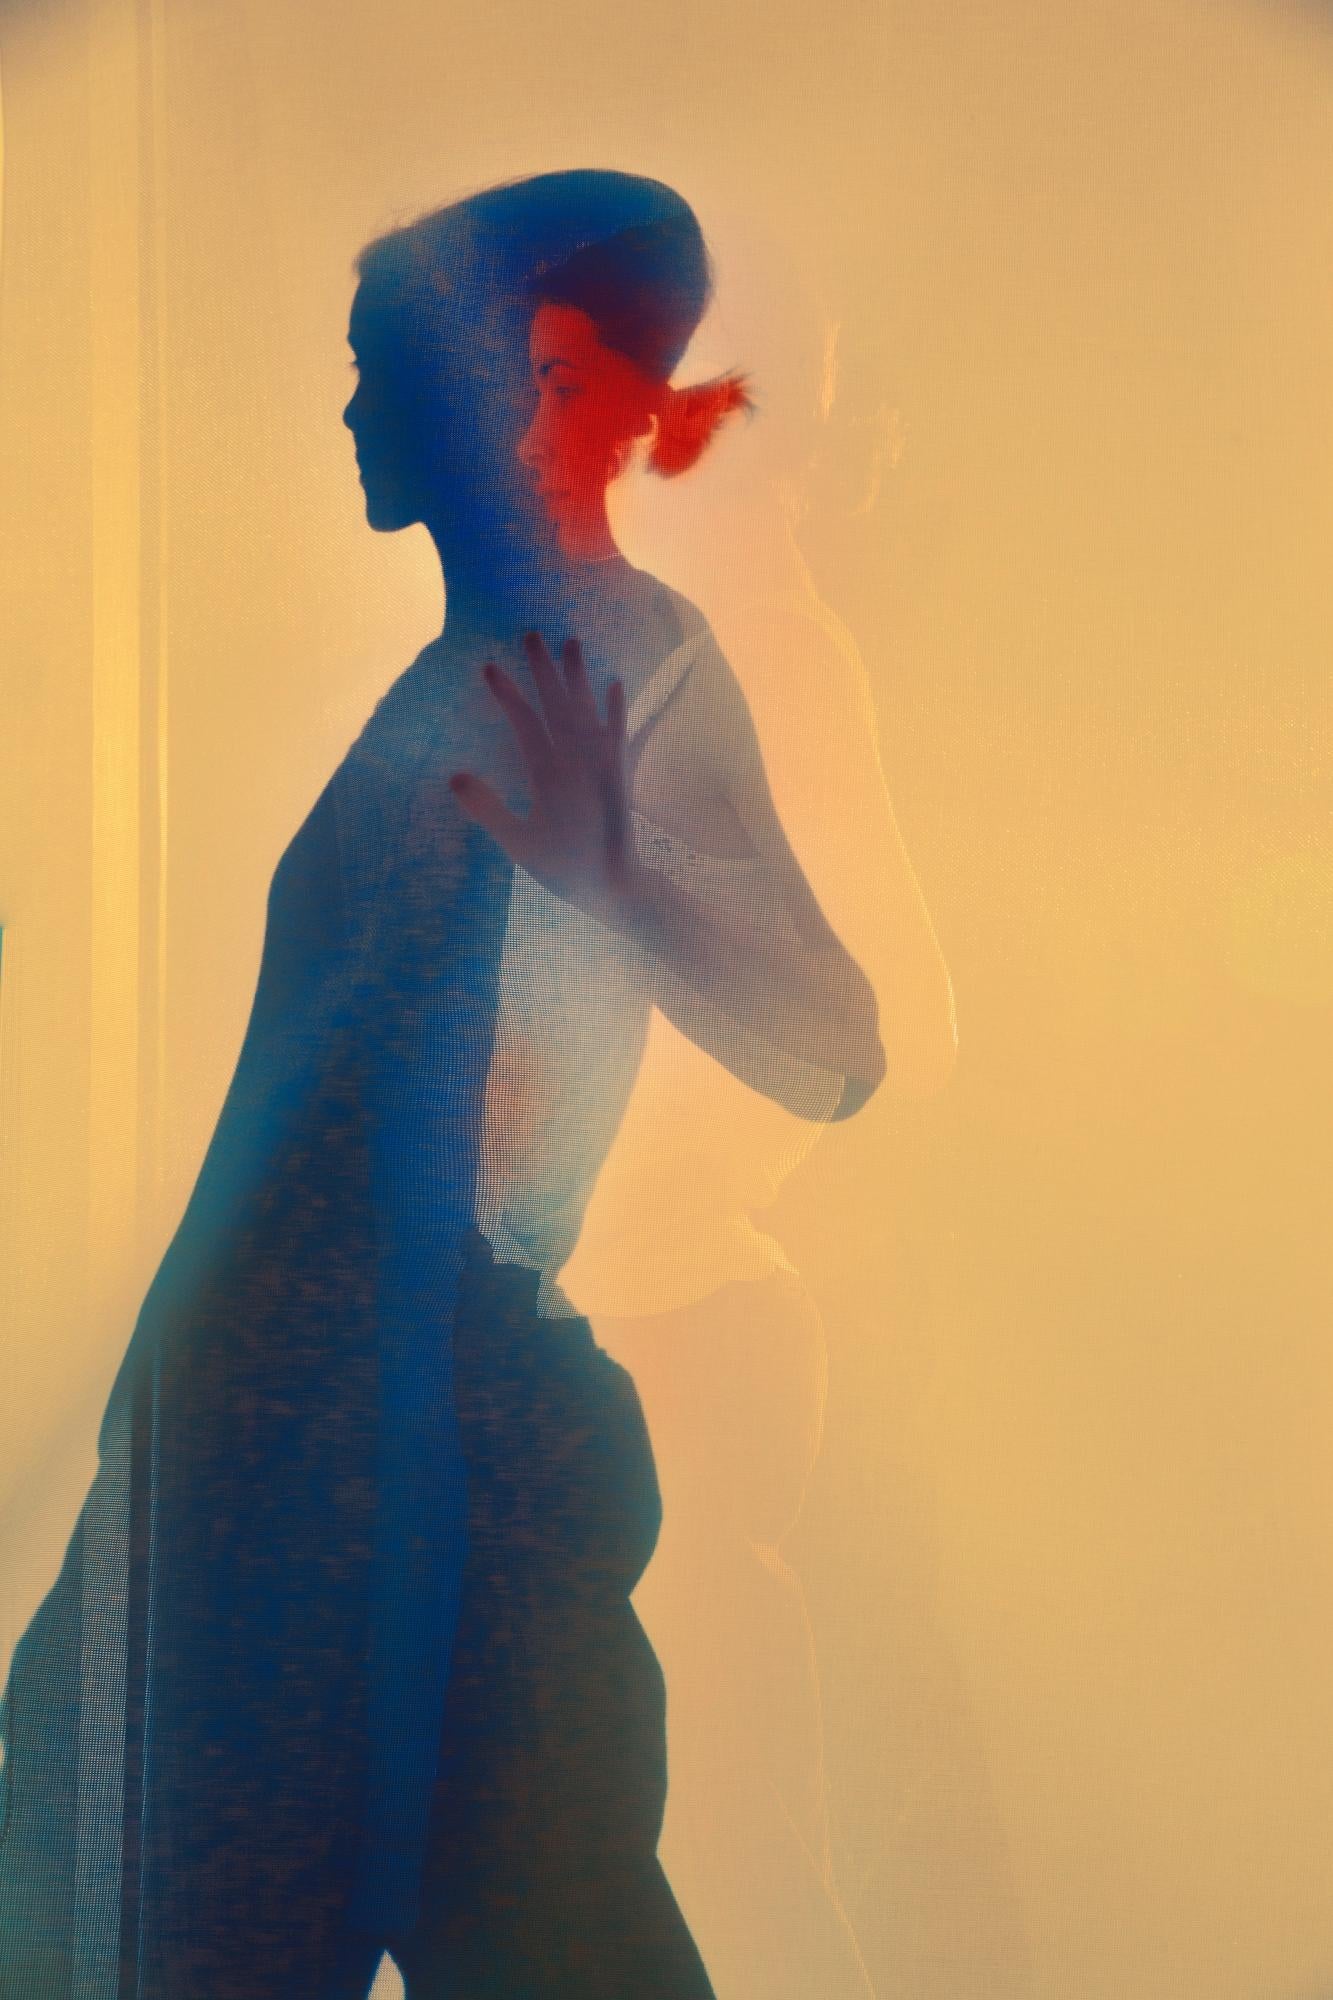 Erik MADIGAN HECK (*1983, United States)
The Sunset Made Me Do It, 2021
Chomogenic print
Sheet 152.4 x 101.6 cm (60 x 40 in.)
Edition of 9 plus 2 artist's proofs (#1/9)
Print only


Originally from Excelsior, Minnesota, Erik Madigan Heck (*1983) is